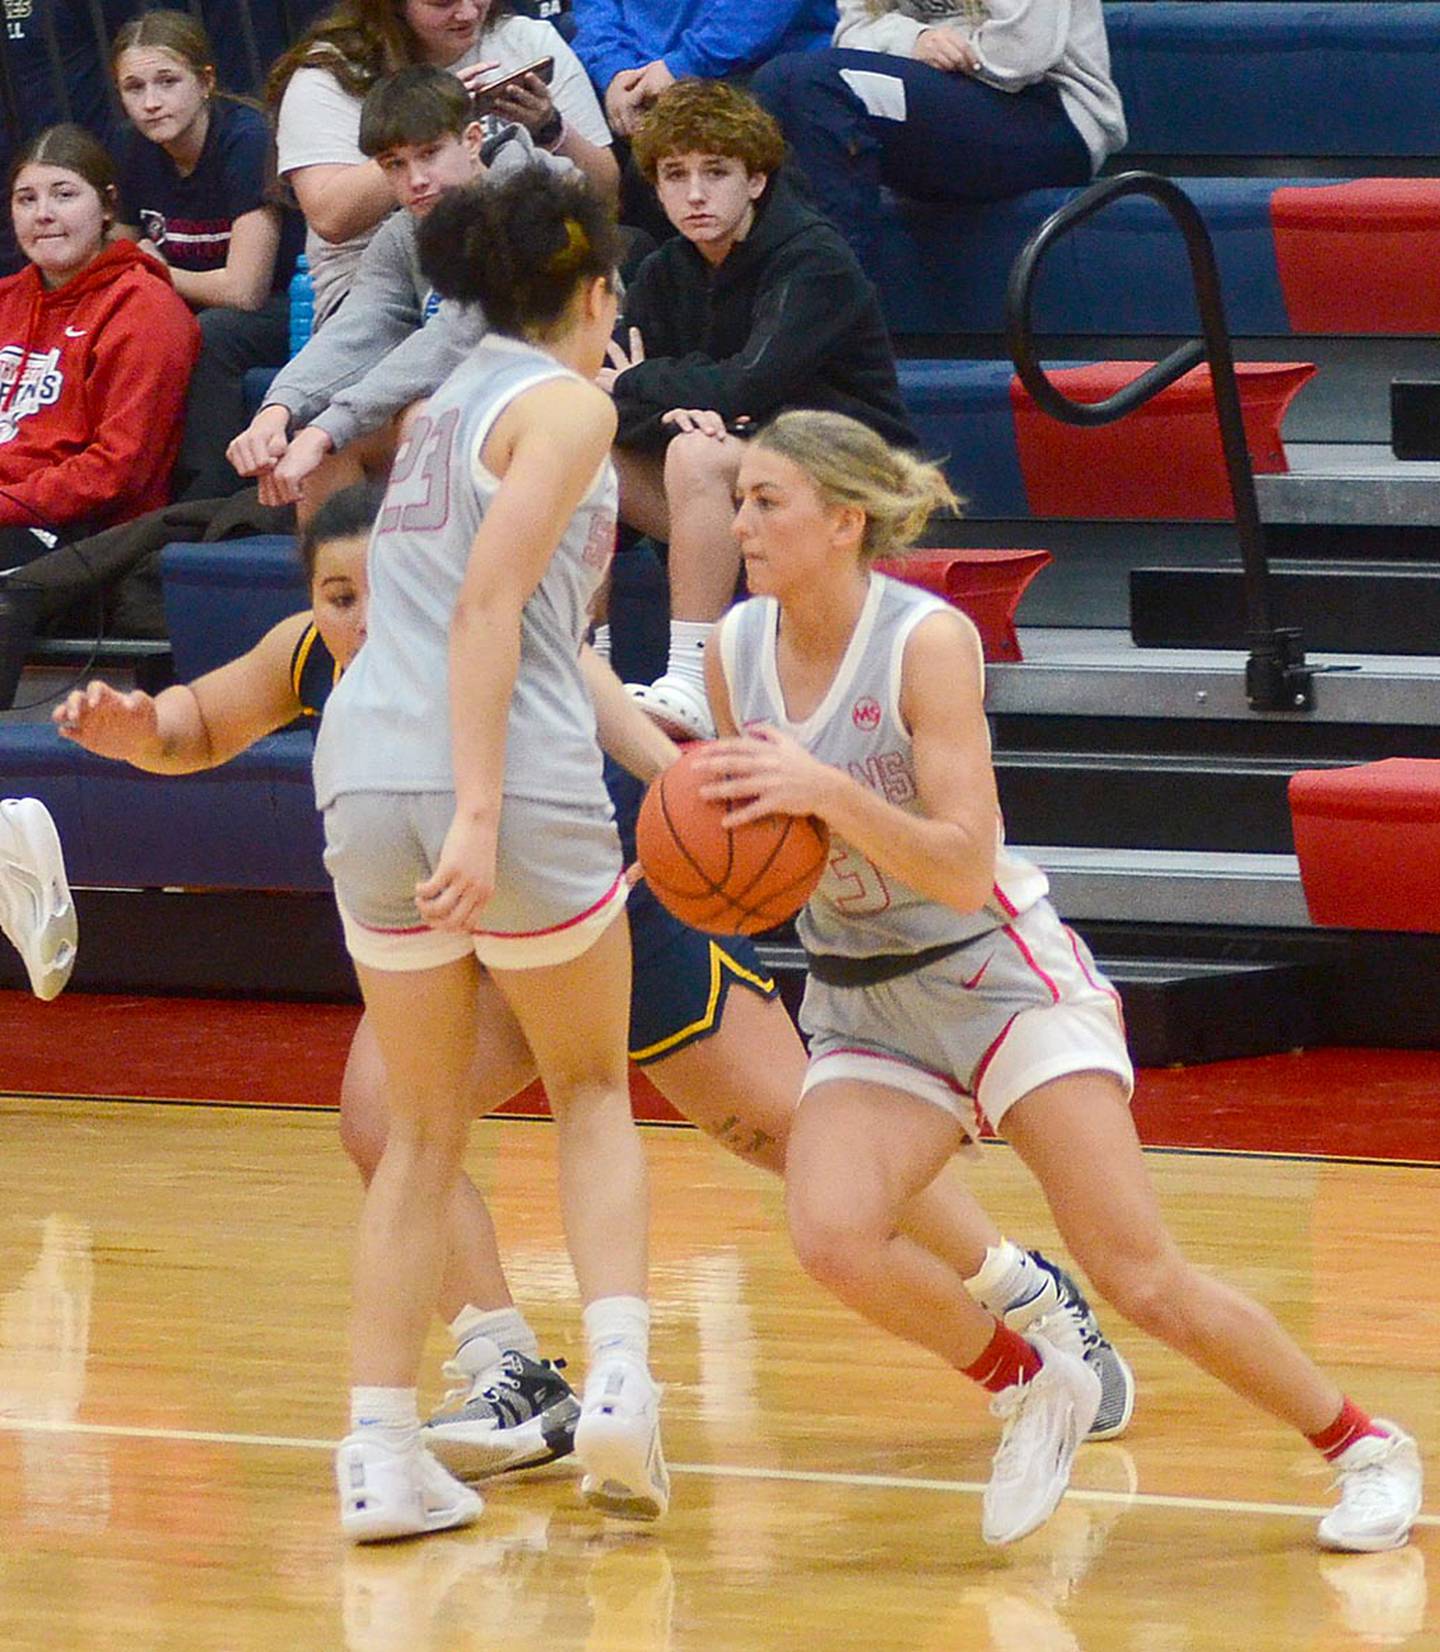 Southwestern guard Cassidy Nelson of Lenox dribbles past the screen of teammate Shyla Moore during Saturday's home game. Nelson scored 15 points in the 75-72 loss to Iowa Lakes.